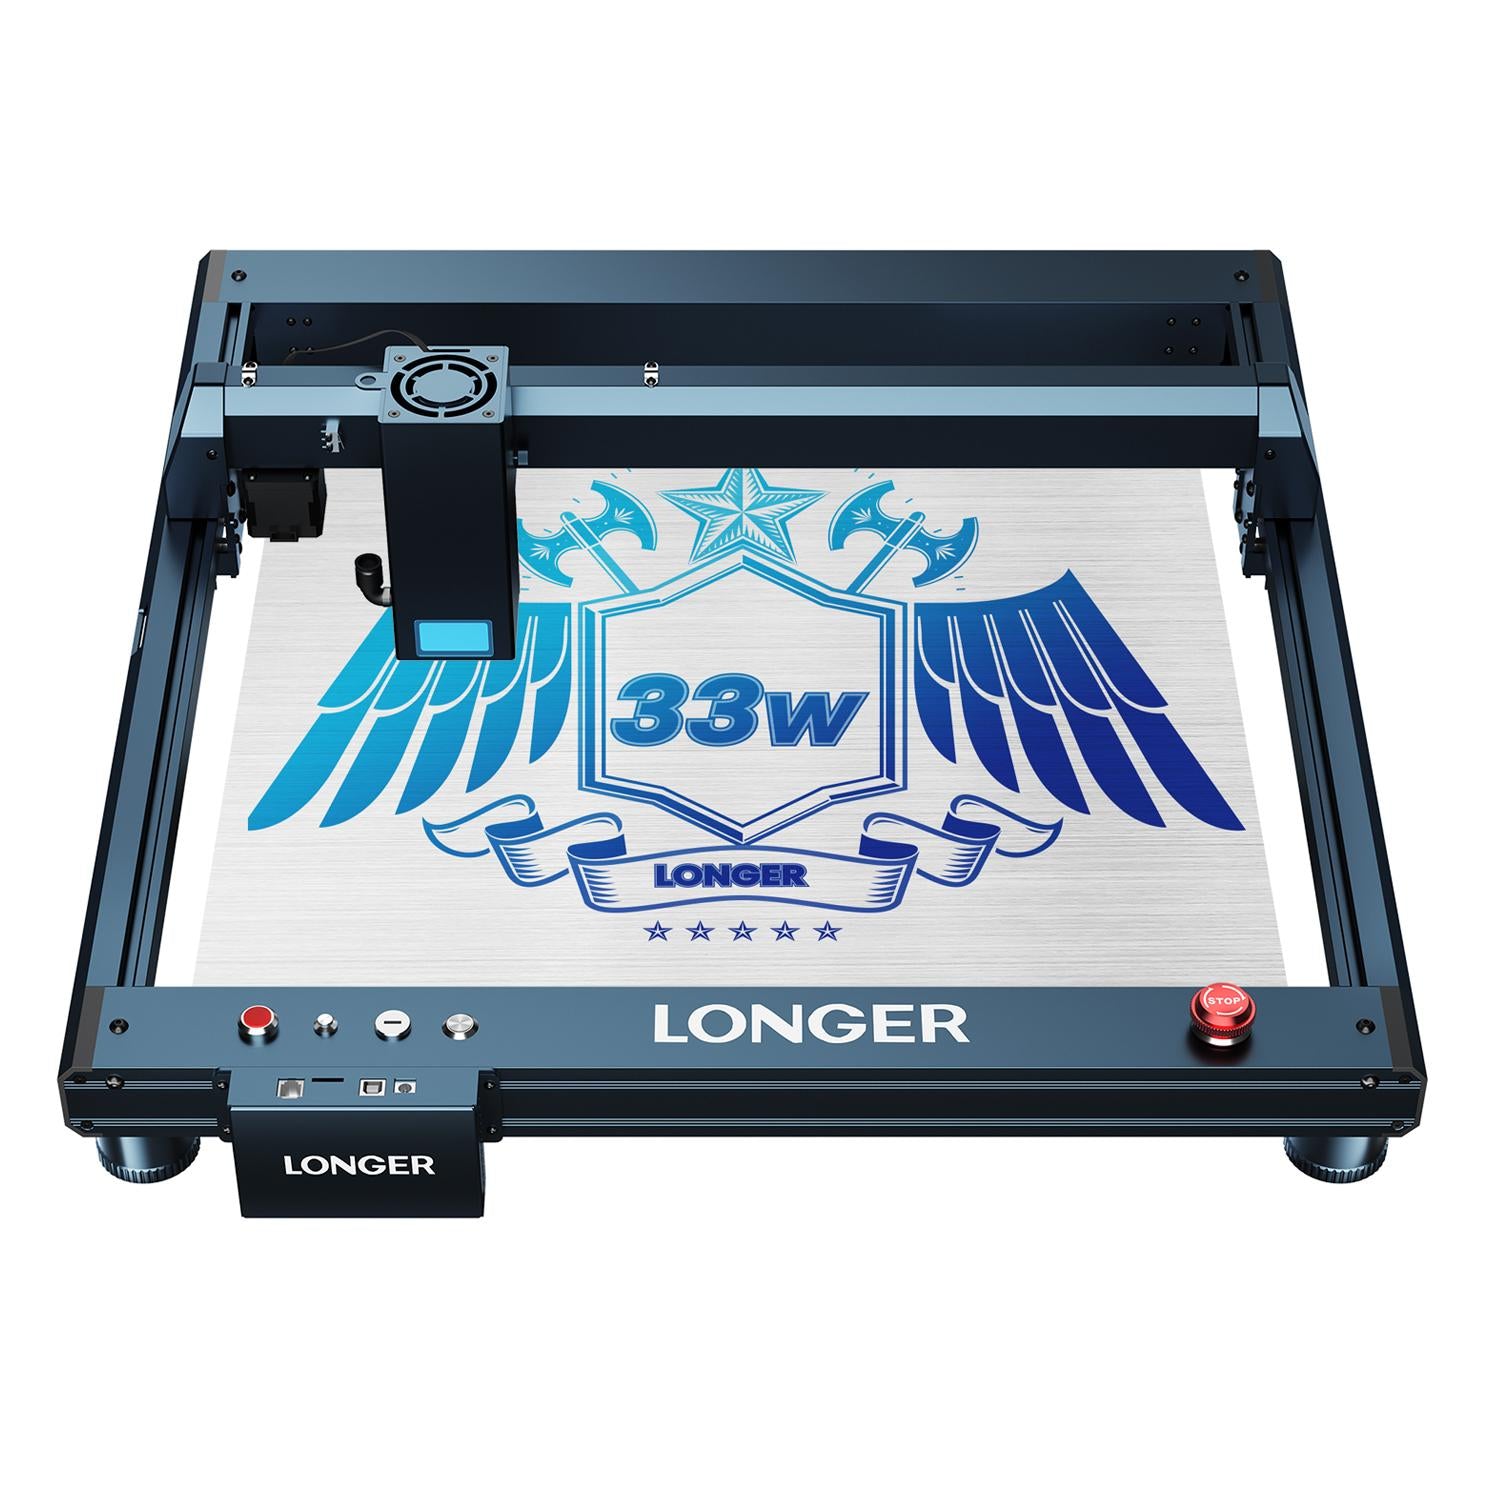 Longer B1 30W Laser Engraver DIY Cutter Engraving Machine with Air Assist 450x440mm - CREATORALLY